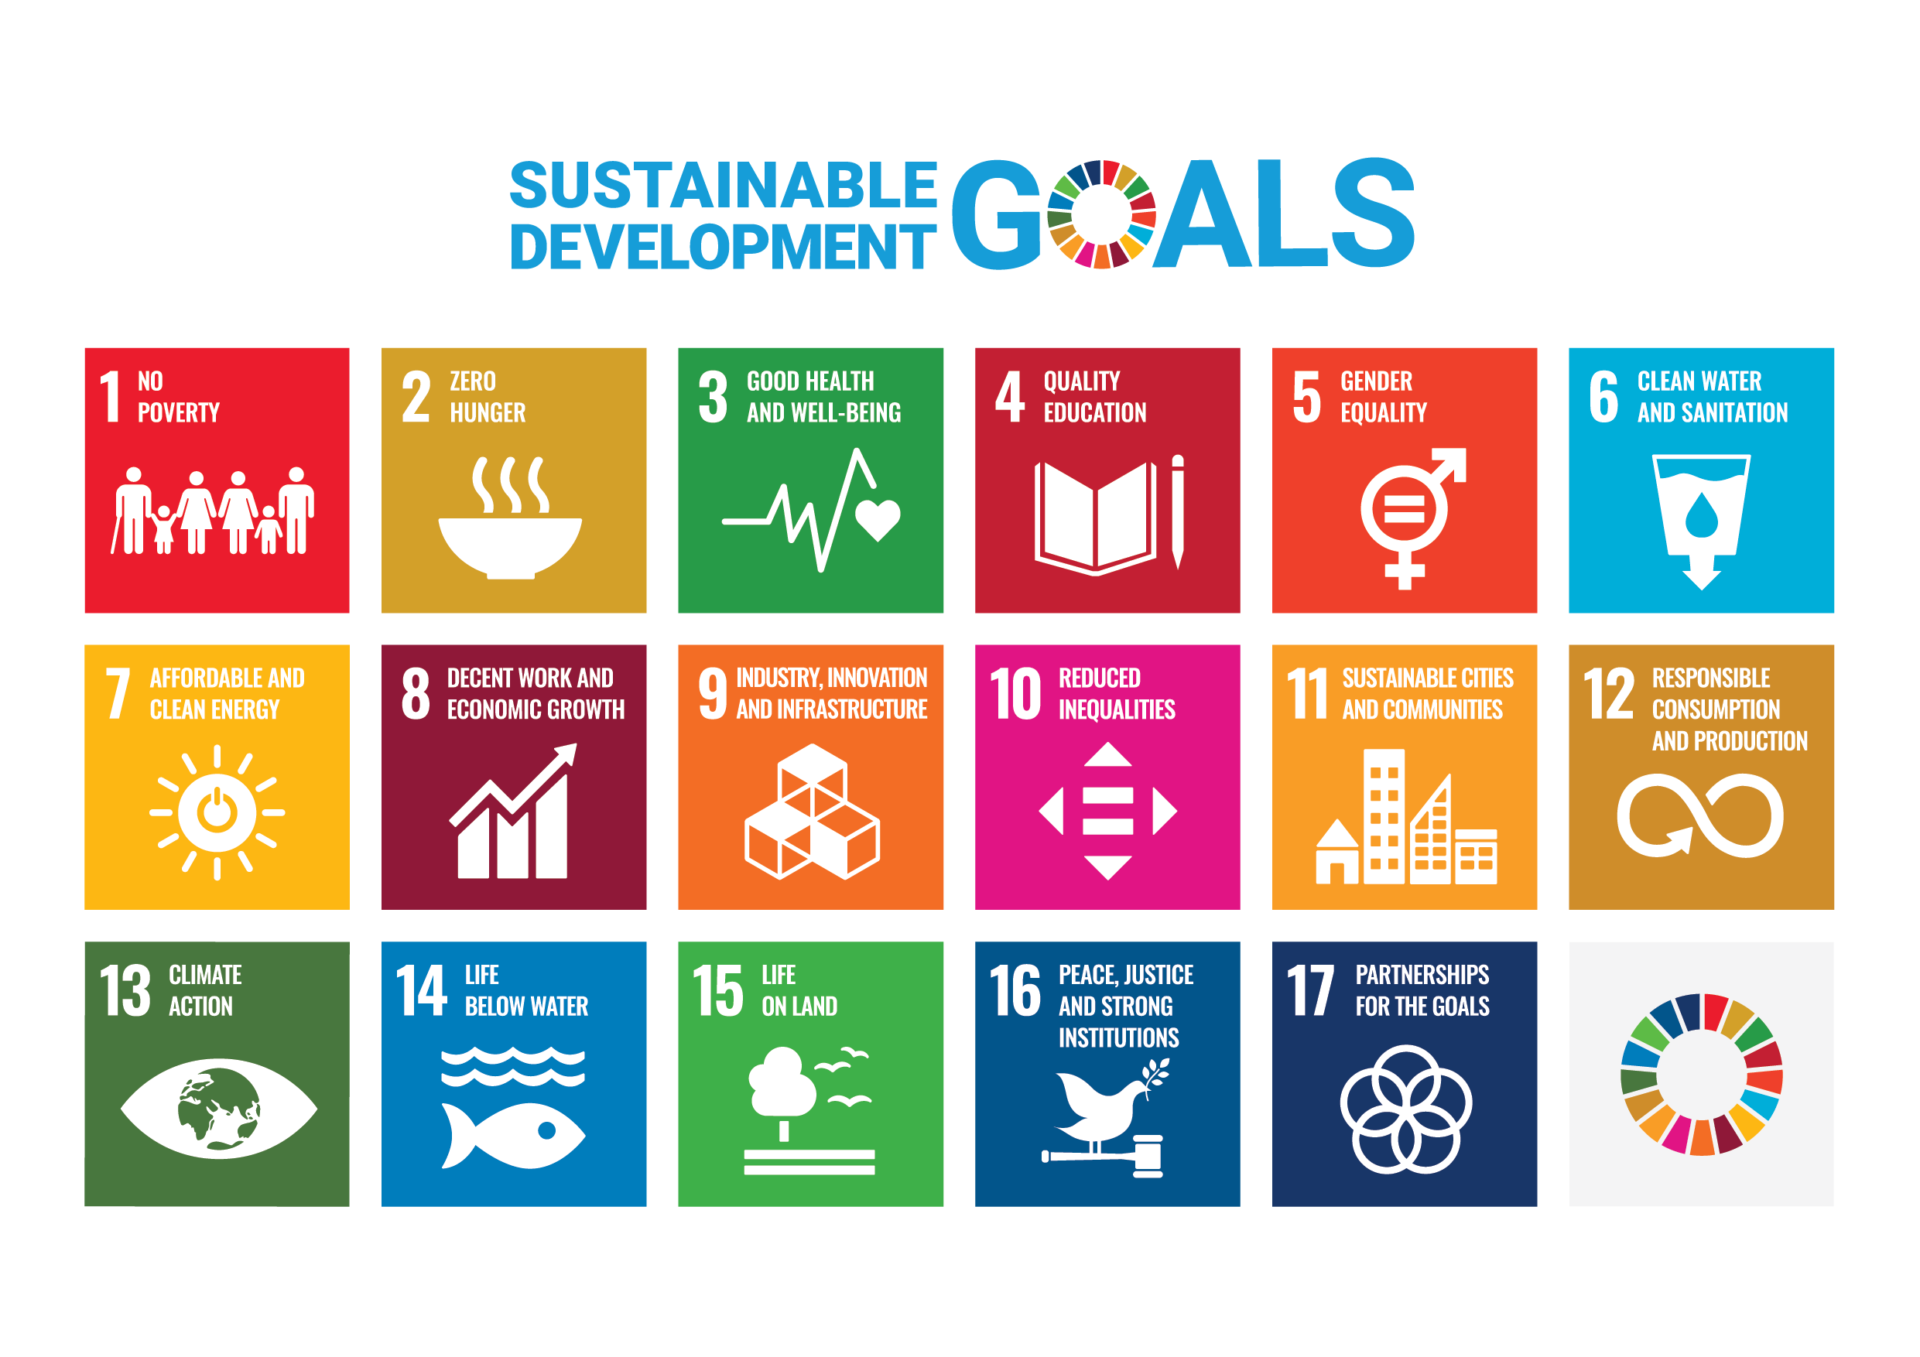 The UN poster for the Sustainable Development Goals: 1) No poverty, 2) Zero hunger, 3) Good health and wellbeing, 4) Quality education, 5) Gender equality, 6) Clean water and sanitation, 7) Affordable and clean energy, 8) Decent work and economic growth, 9) Industry, Innovation and Infrastructure, 10) Reduced inequalities, 11) Sustainable cities and communities, 12) Responsible consumption and production, 13) Climate action, 14) Life below water, 15) Life on land, 16) Peace, justice and strong institutions, 17) Partnerships for the goals